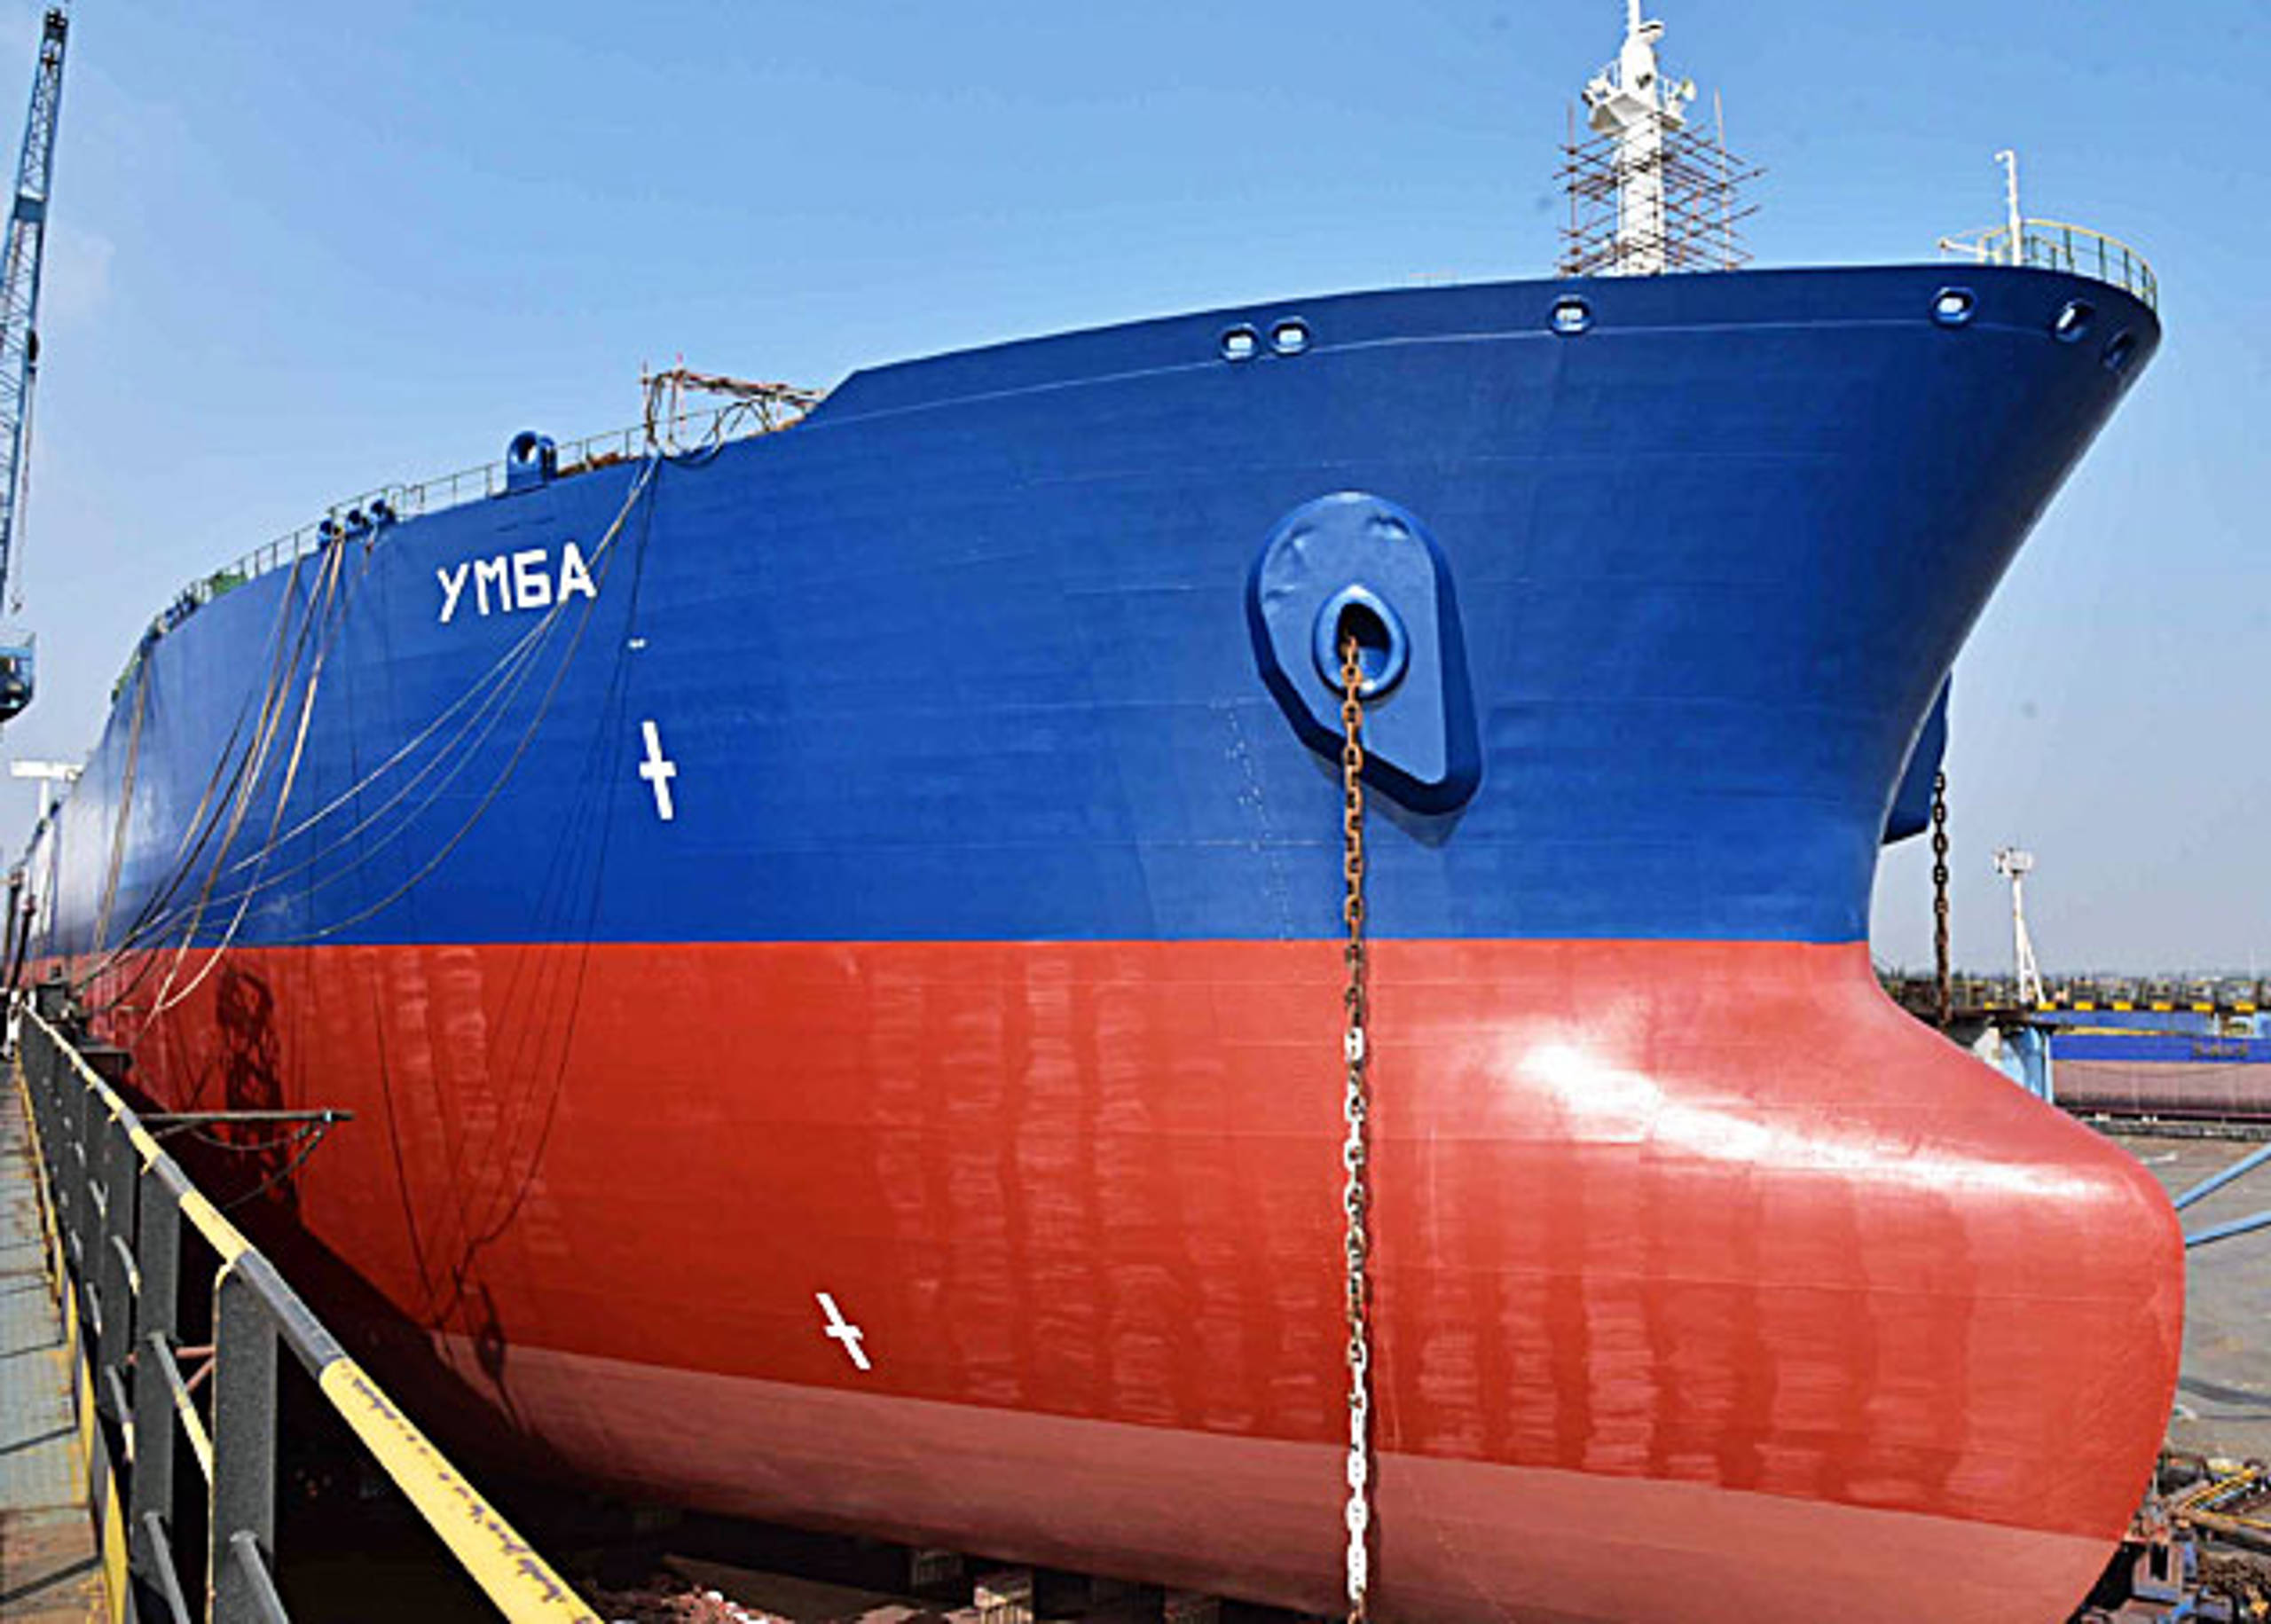 The oil tanker Umba was coated with Jotun products